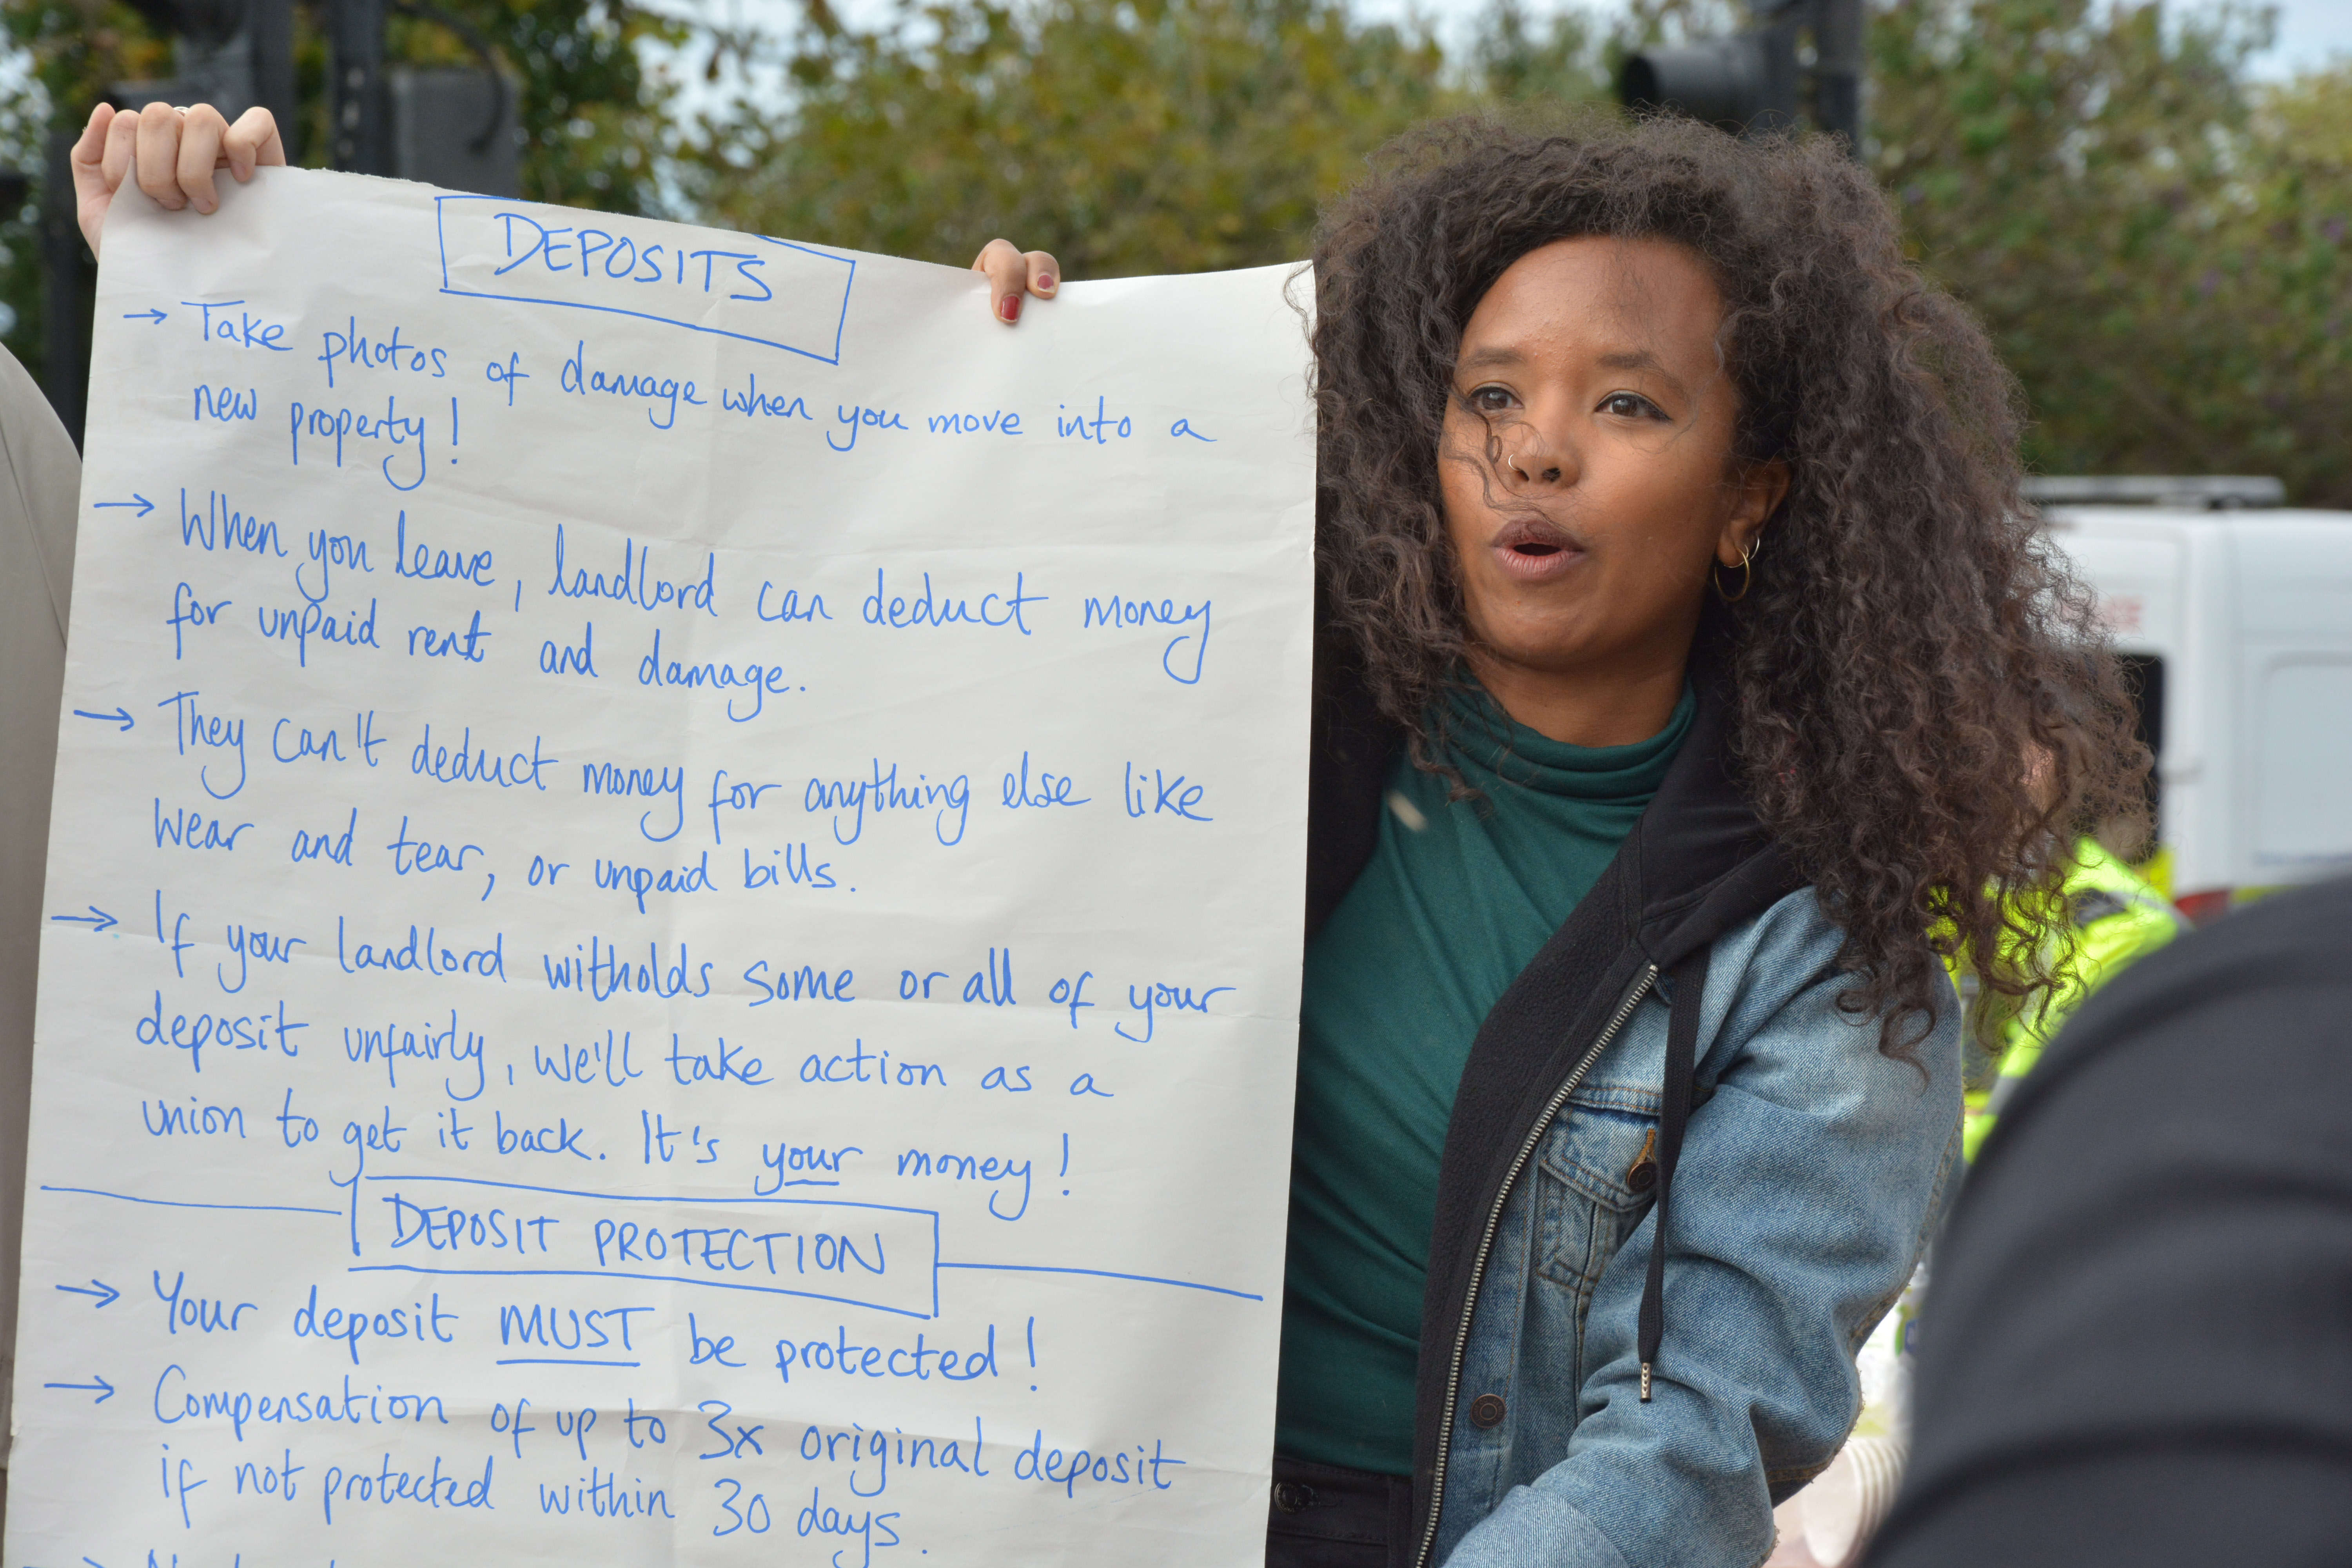 Activist with banner displaying information about renters rights